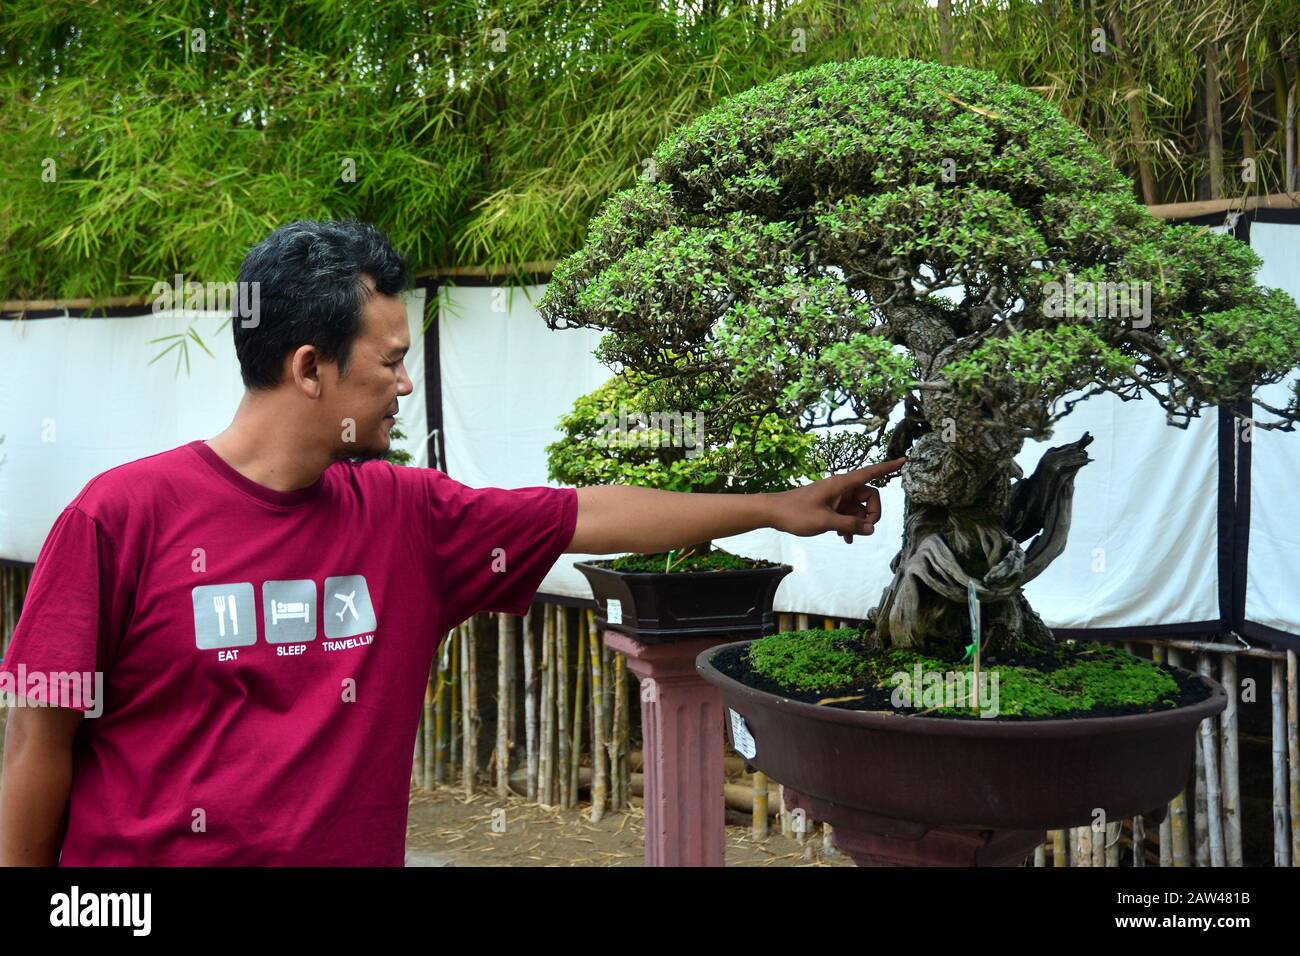 Visitors see the plants at the location of the Bonsai contest held in Jember, East Java, Indonesia, Wednesday August 21, 2019. In the art contest, the plants dwarf these plants, in addition to achievement events, also as a venue for environmental promotion and increased creativity for the creative industry of Bonsai art. Stock Photo